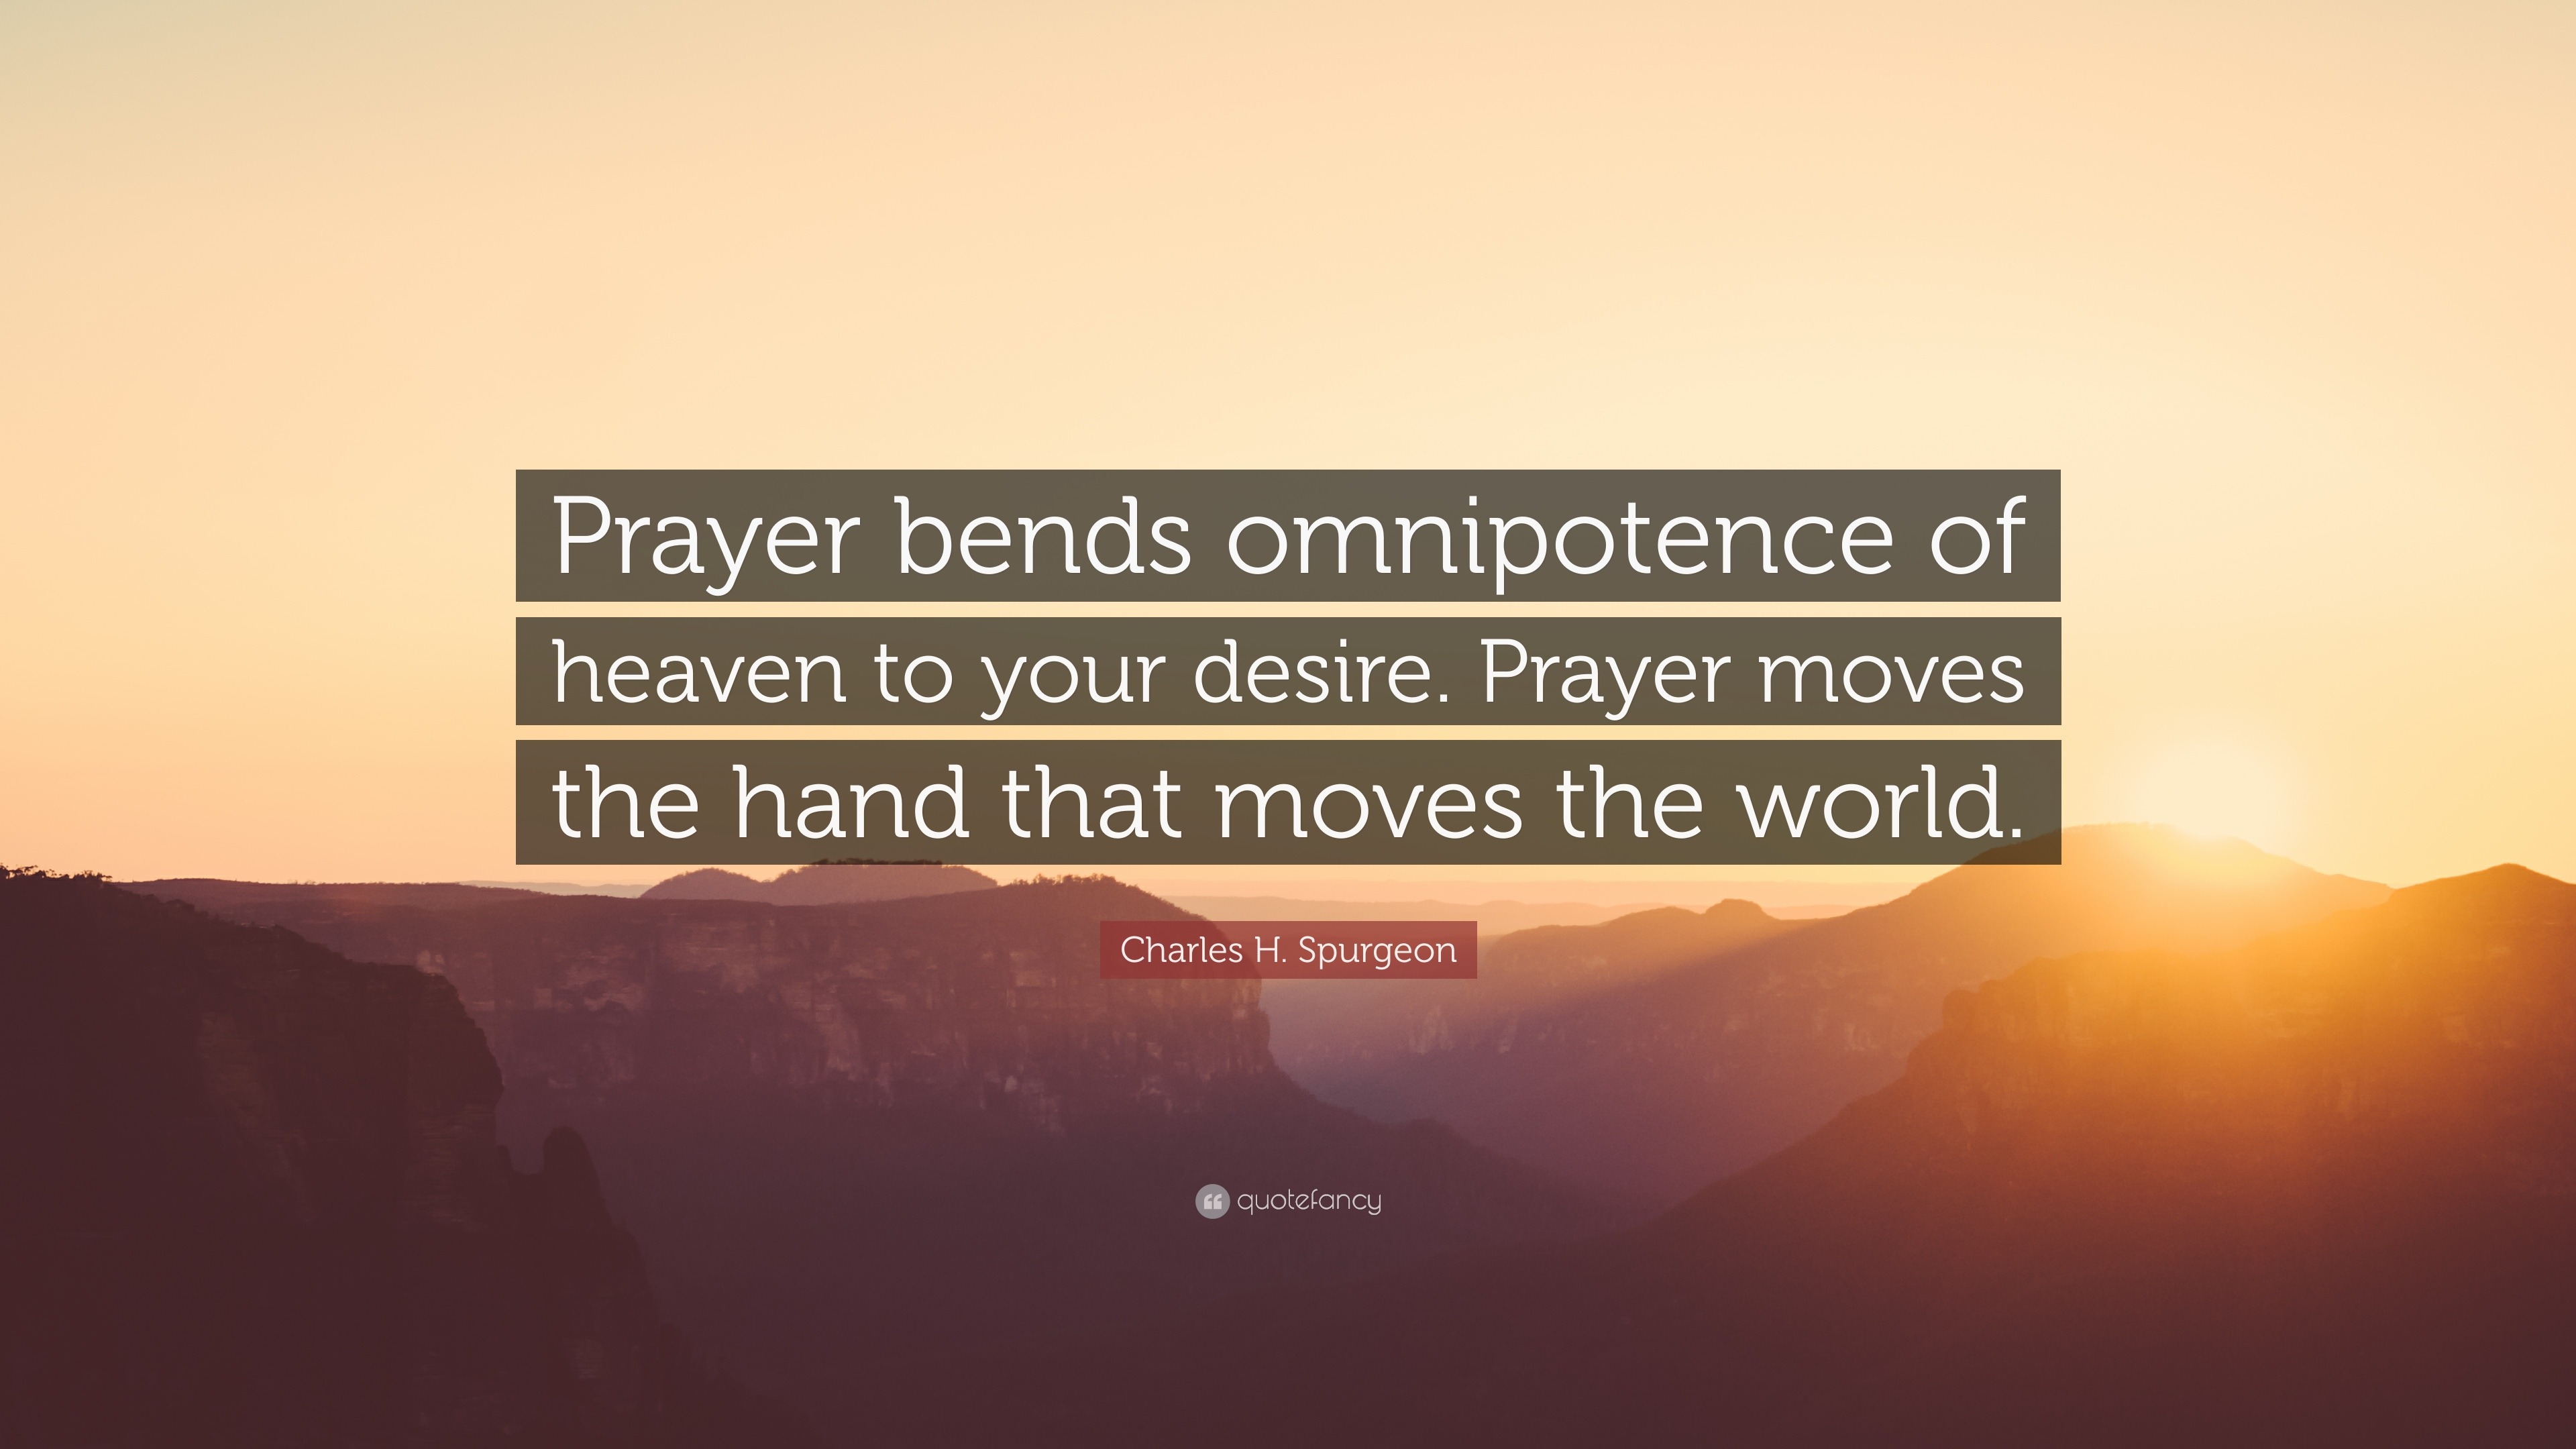 Charles H. Spurgeon Quote: “Prayer bends omnipotence of heaven to your ...